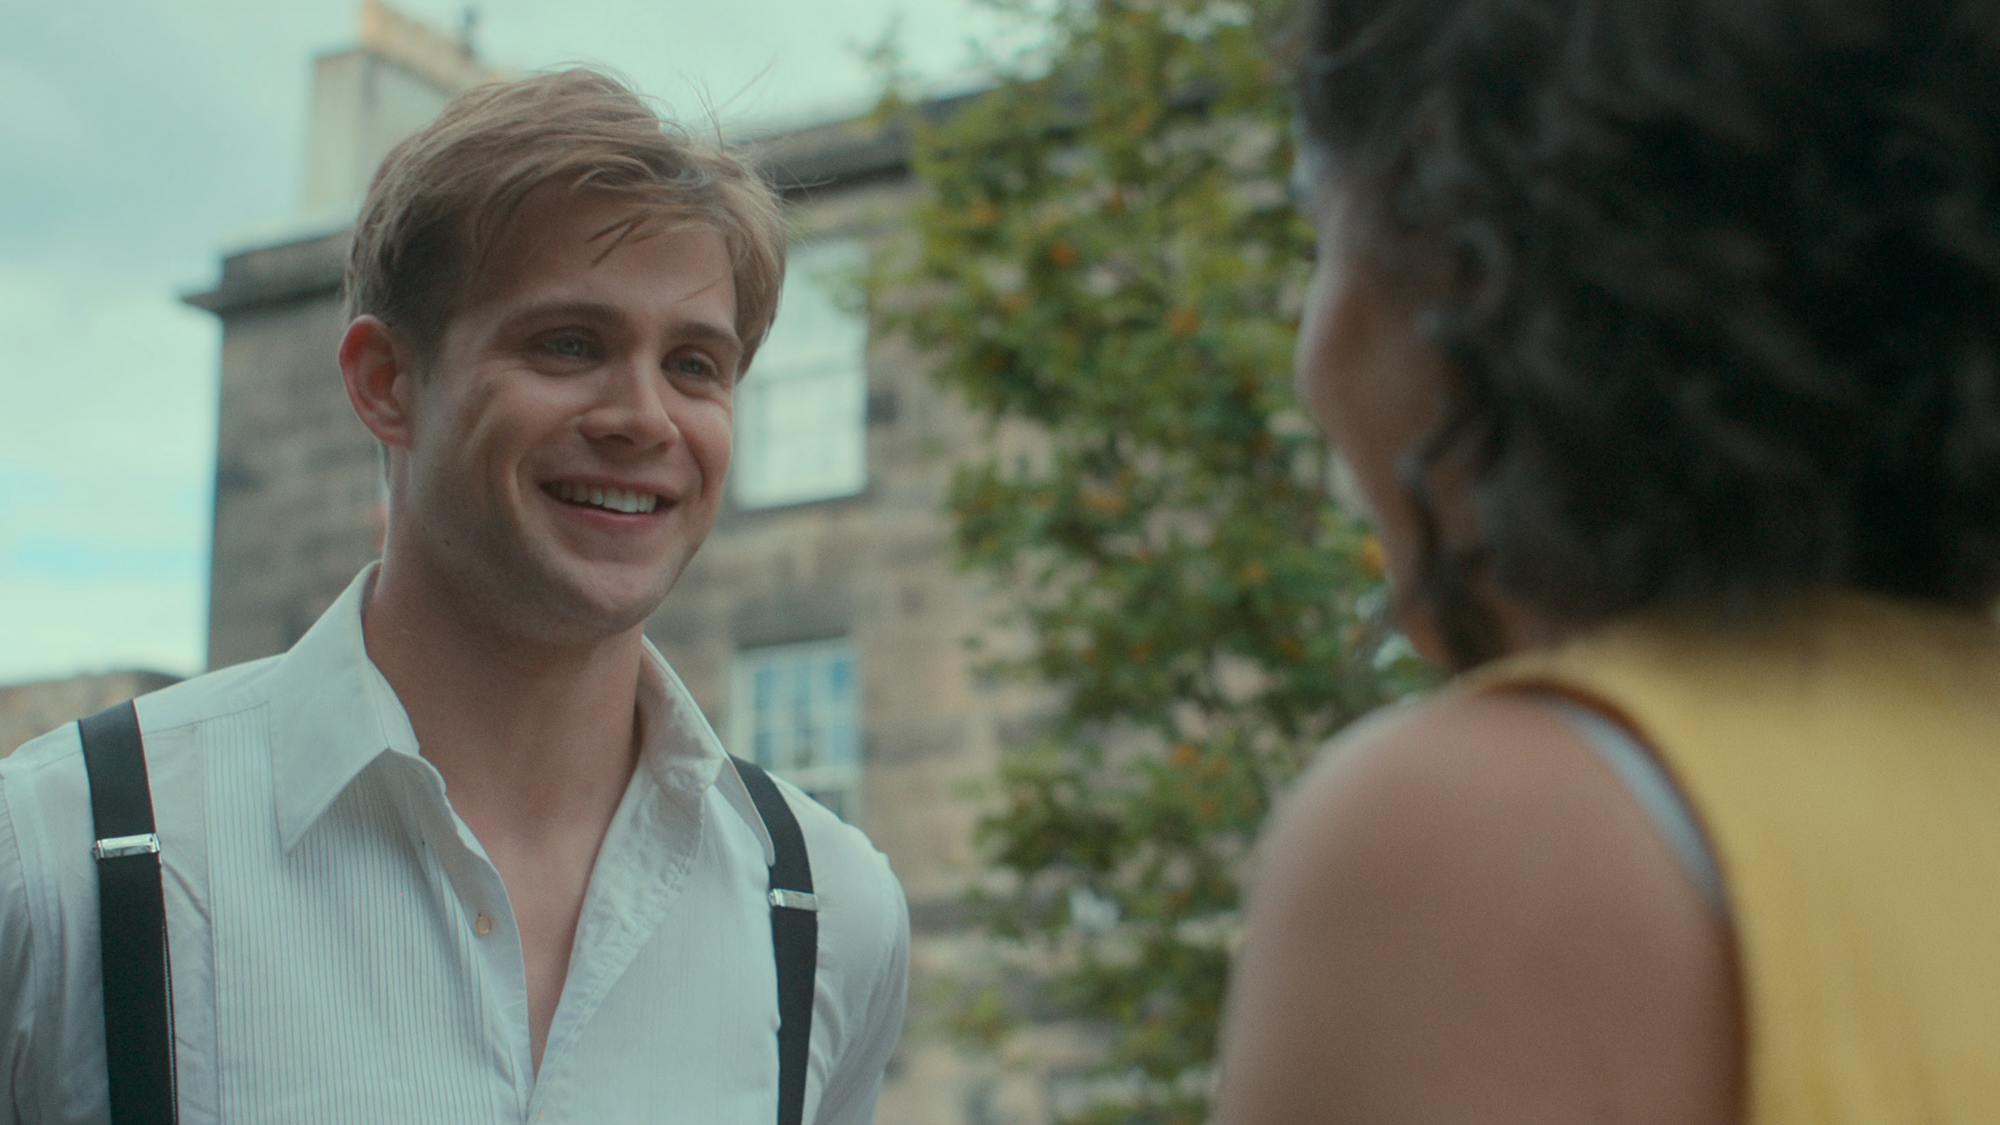 Dexter Mayhew (Leo Woodall) wears black suspenders over a white shirt and smiles at Emma Morley (Ambika Mod), whose back is turned from us. 